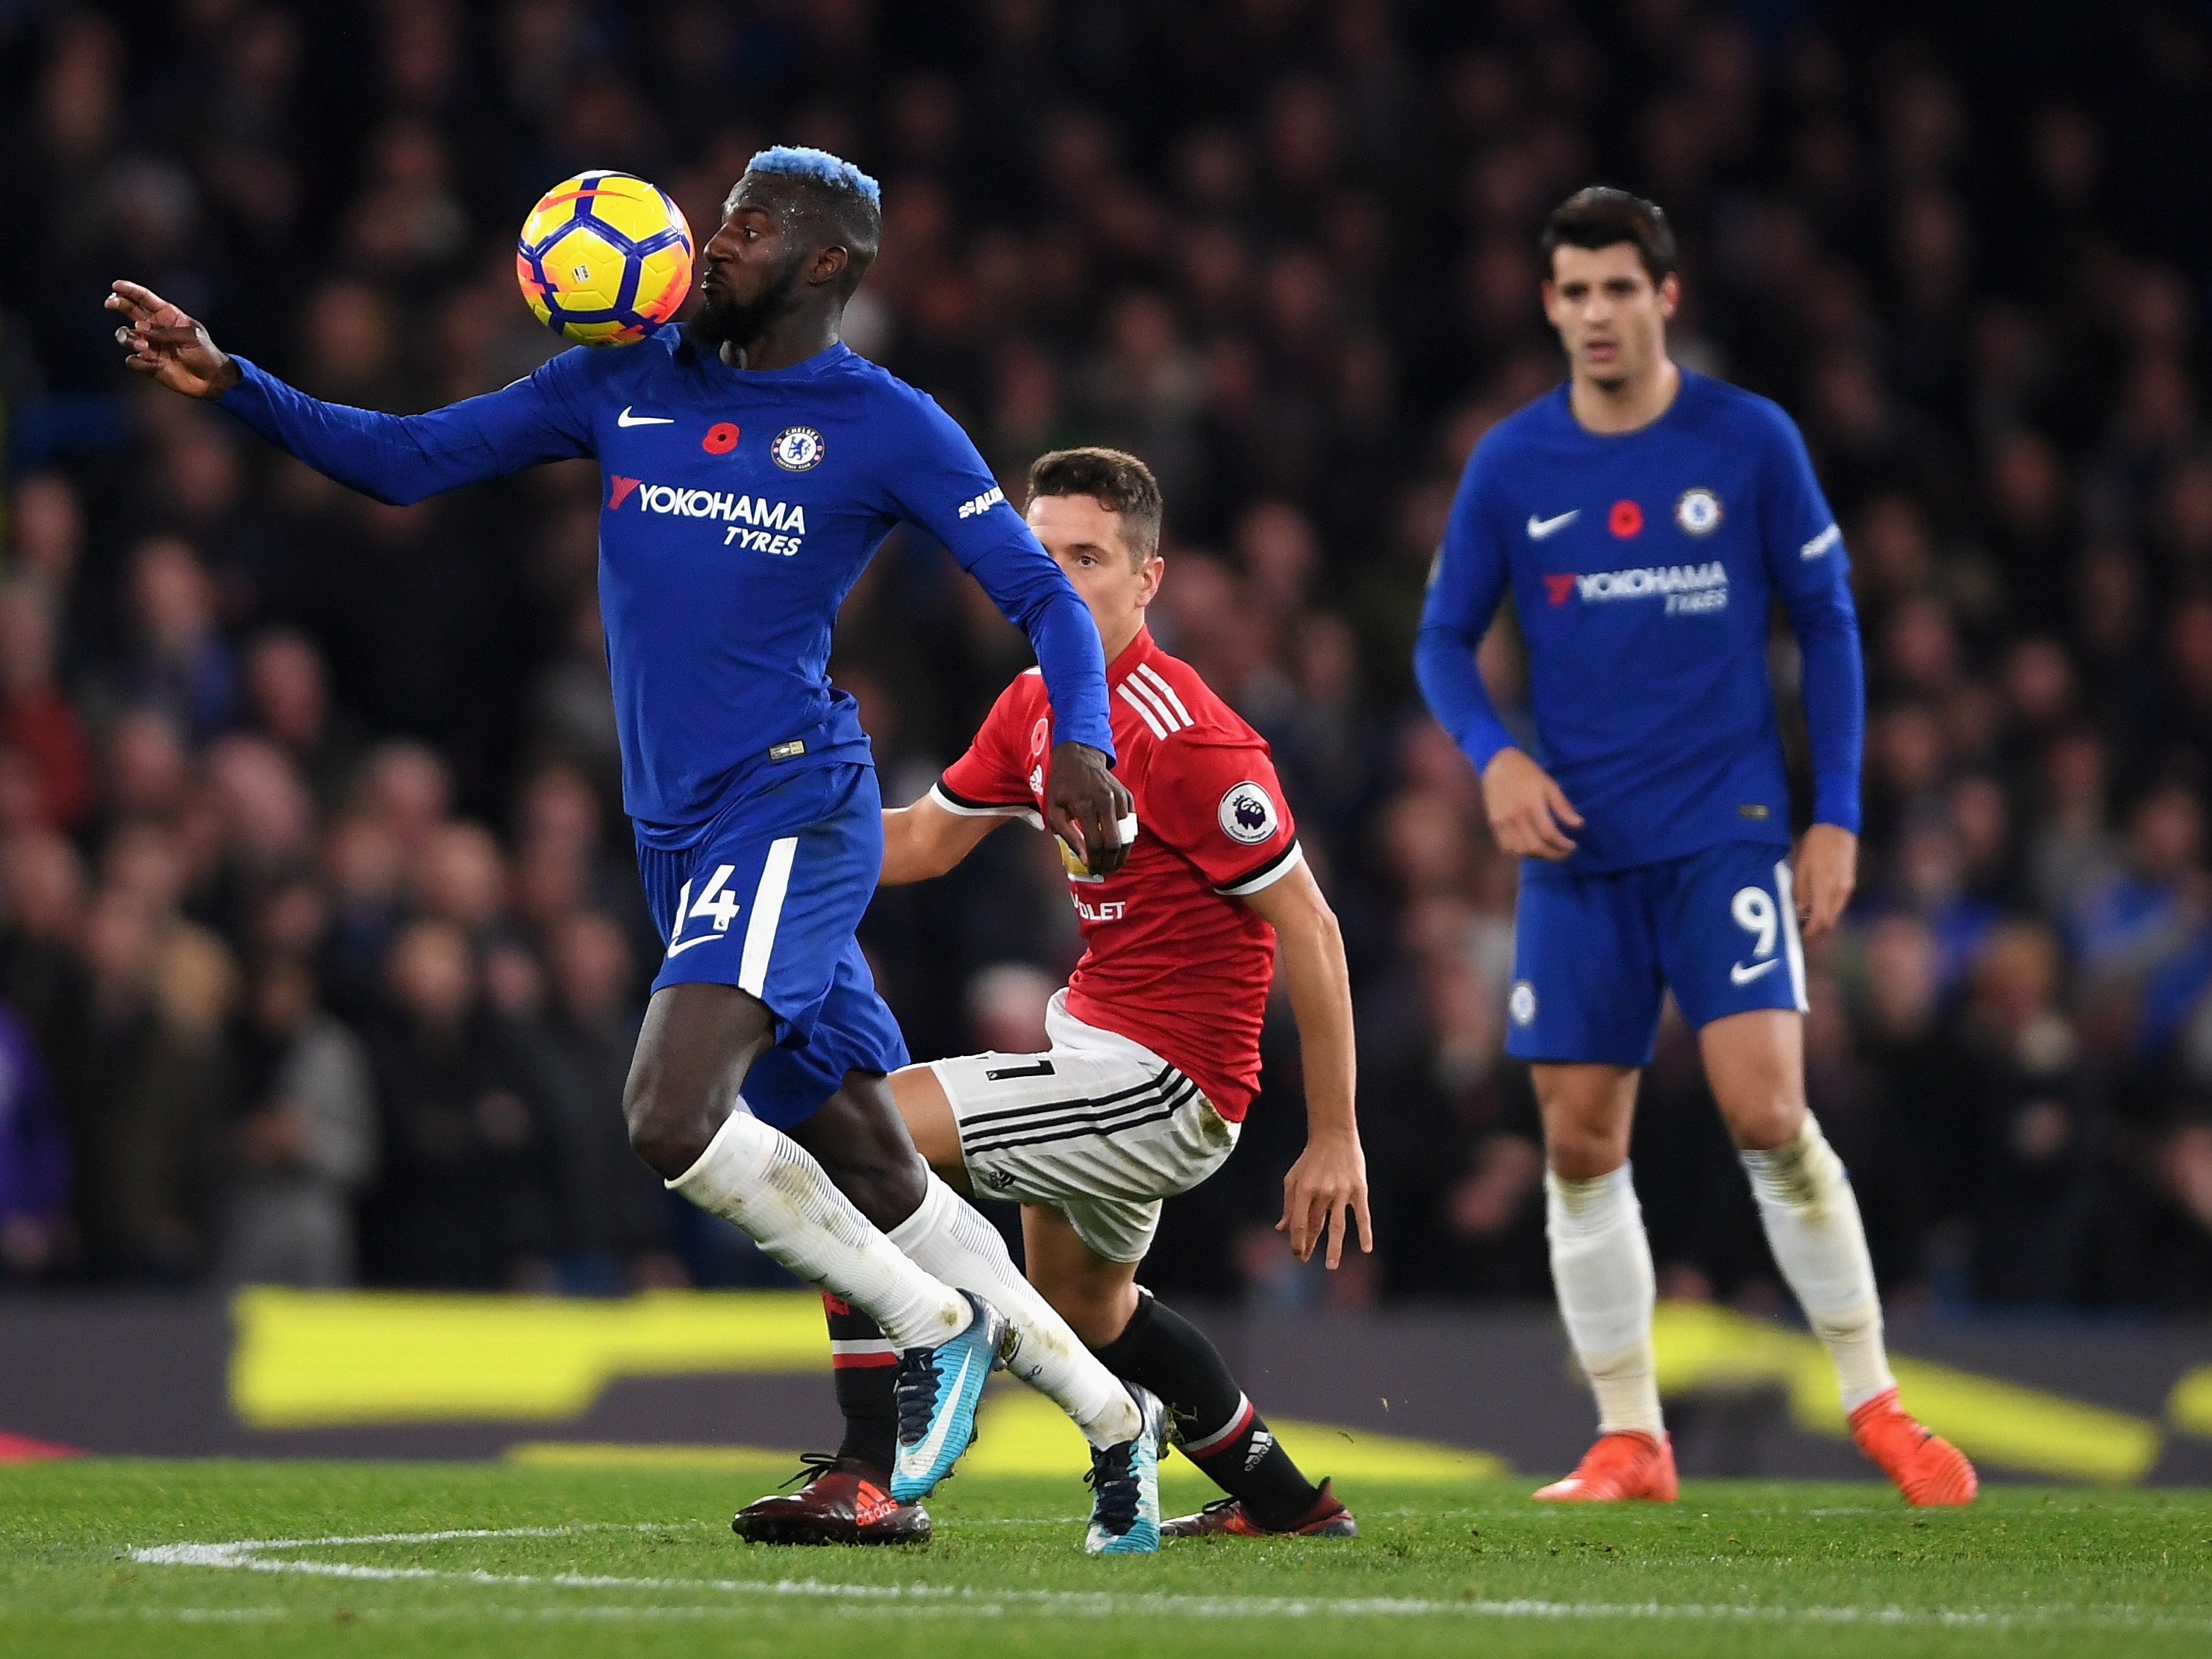 LONDON, ENGLAND - NOVEMBER 05: Tiemoue Bakayoko of Chelsea in action during the Premier League match between Chelsea and Manchester United at Stamford Bridge on November 5, 2017 in London, England.  (Photo by Mike Hewitt/Getty Images)